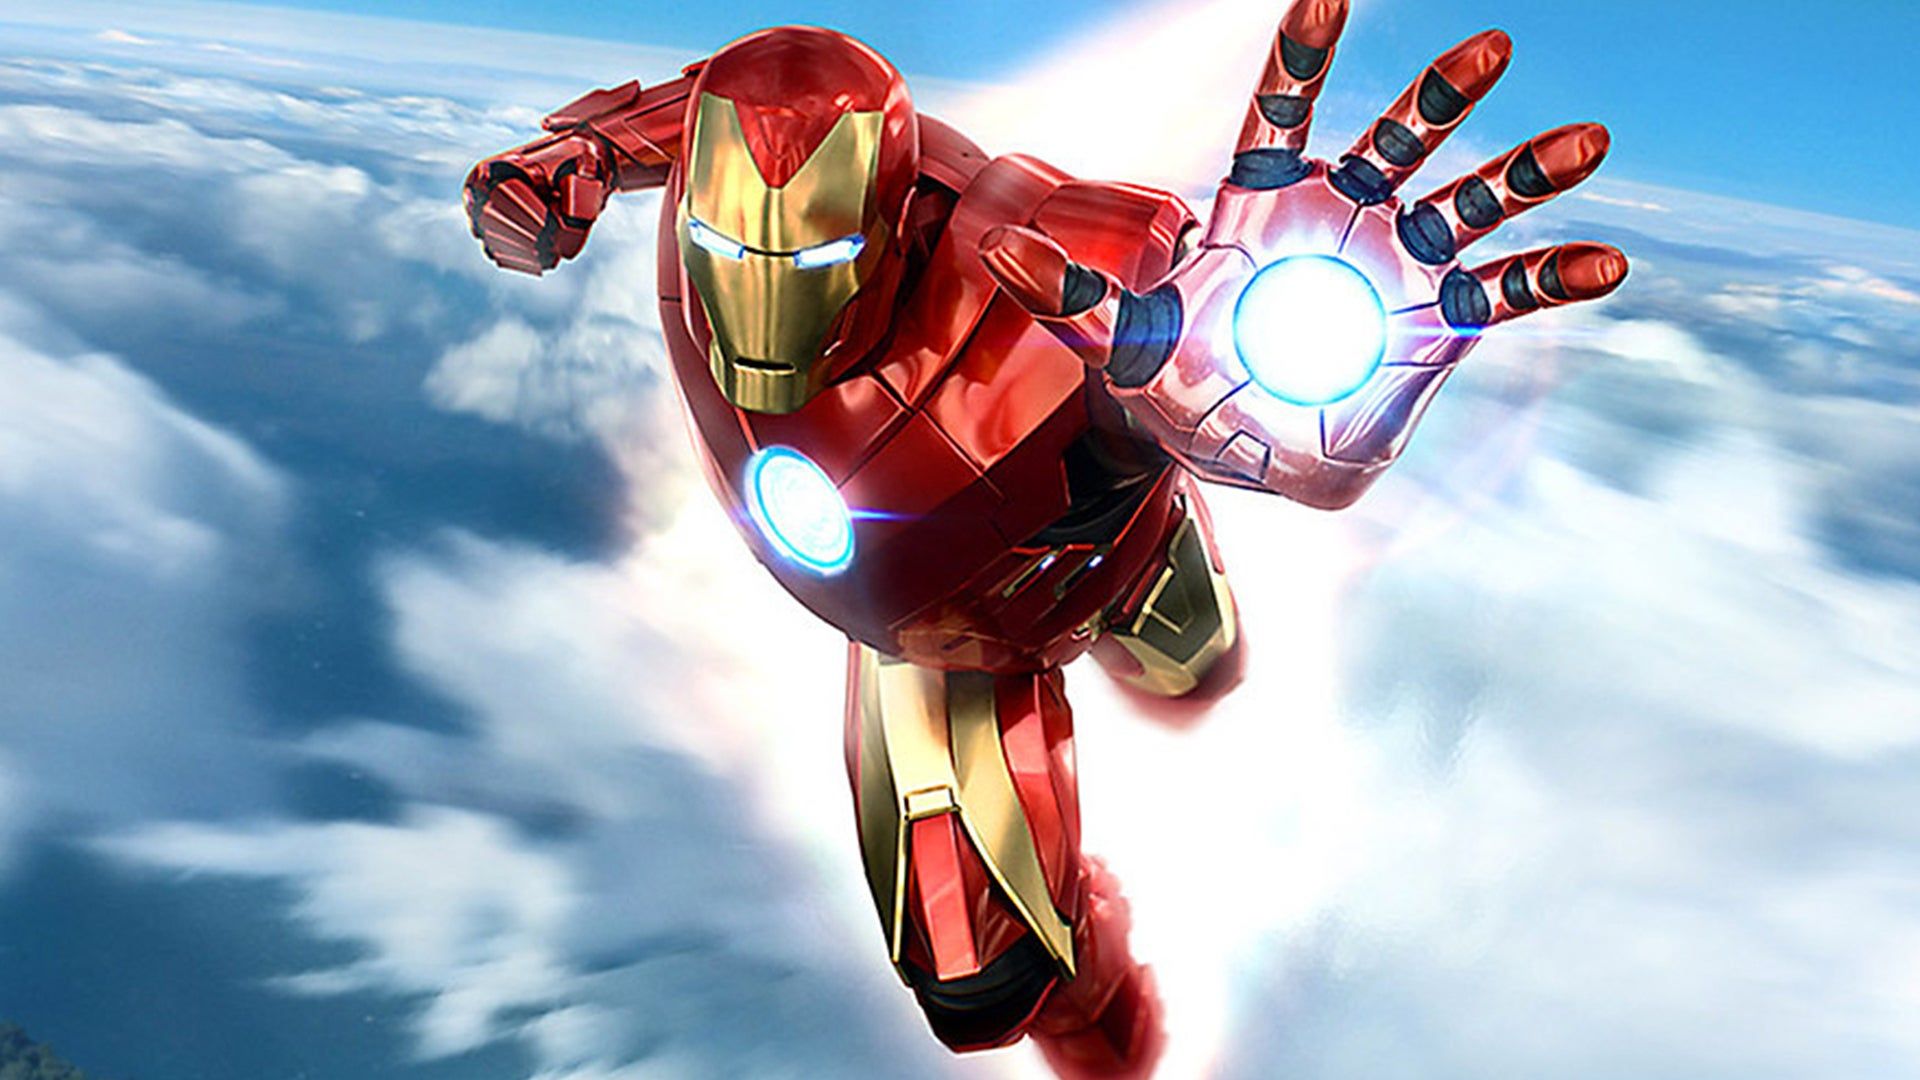 News: Marvel's Iron Man VR Director Offers New Gameplay, Story Details